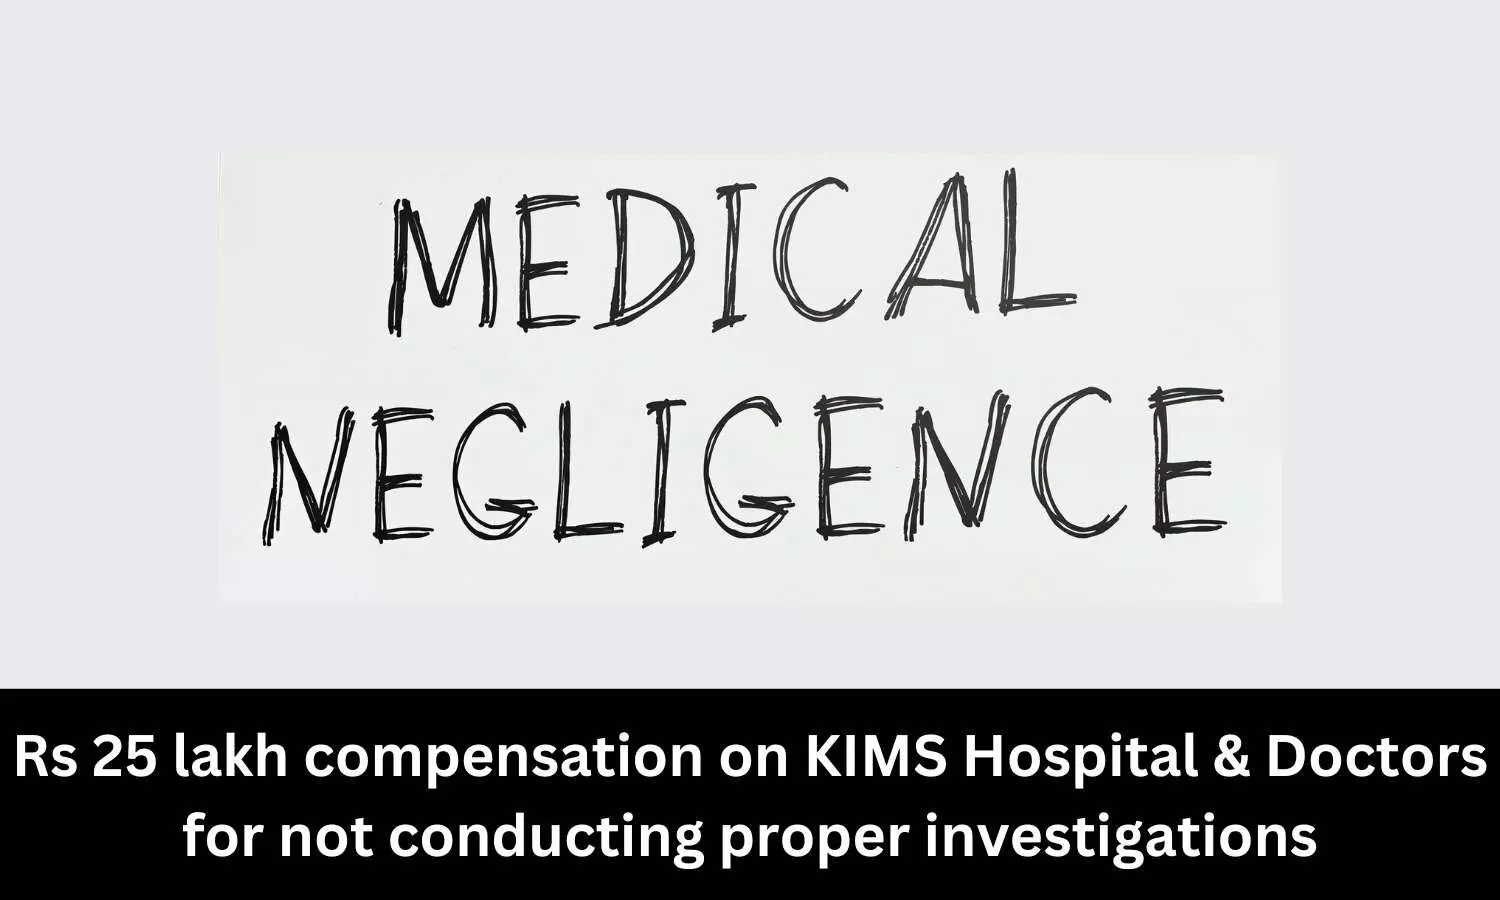 Patient dies of Subarachnoid Hemorrhage: NCDRC directs KIMS Hospital and doctors to pay Rs 25 lakh compensation